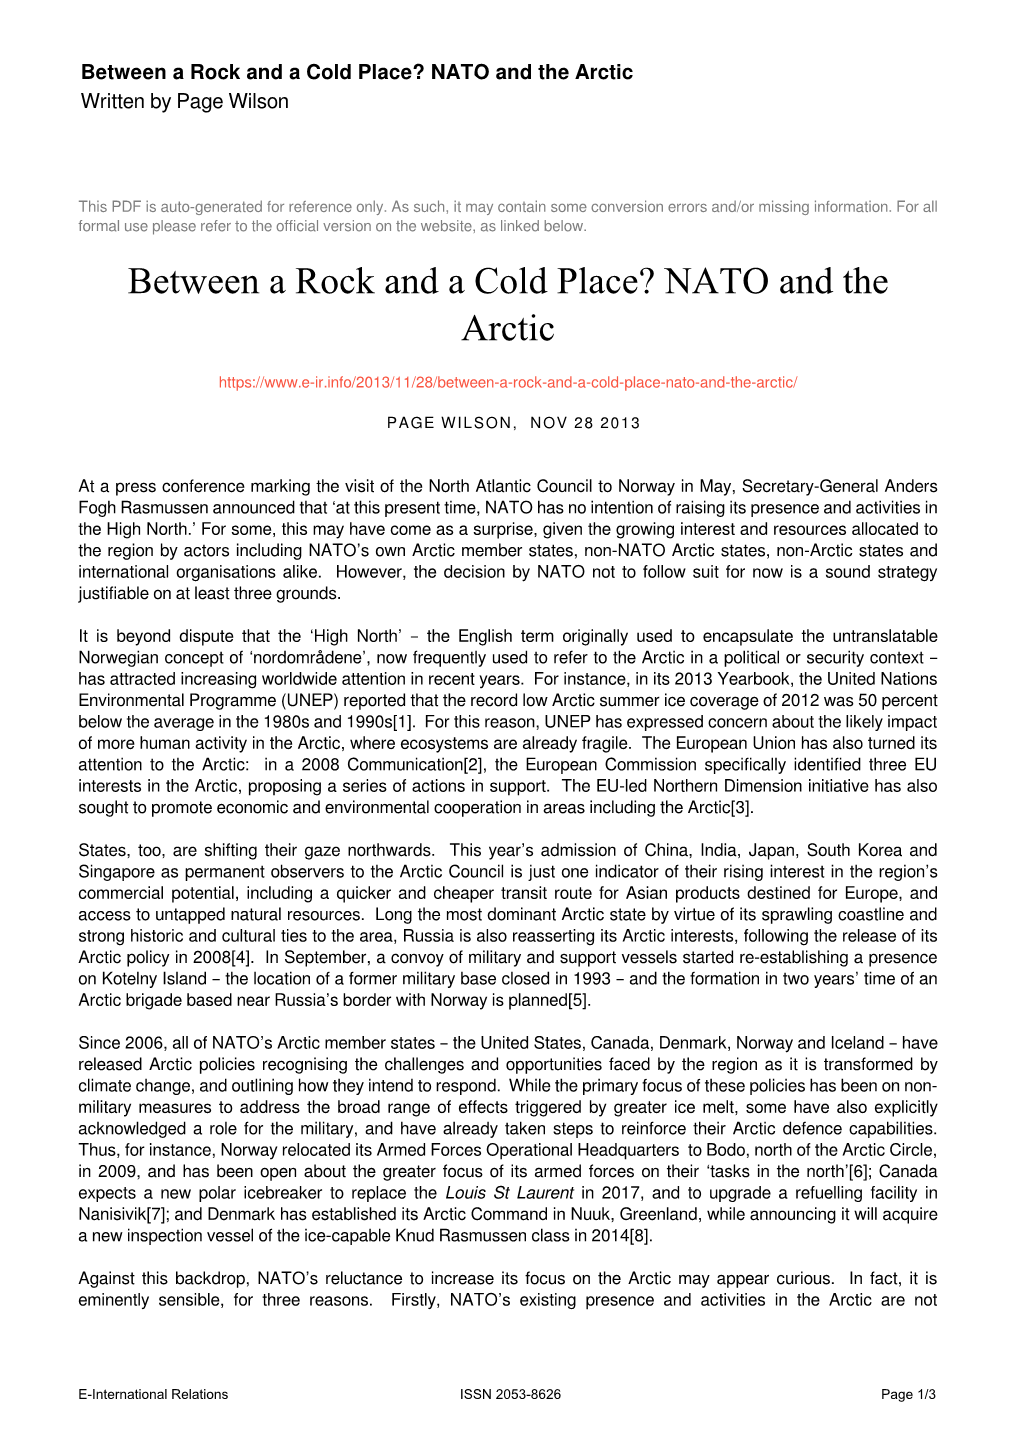 NATO and the Arctic Written by Page Wilson